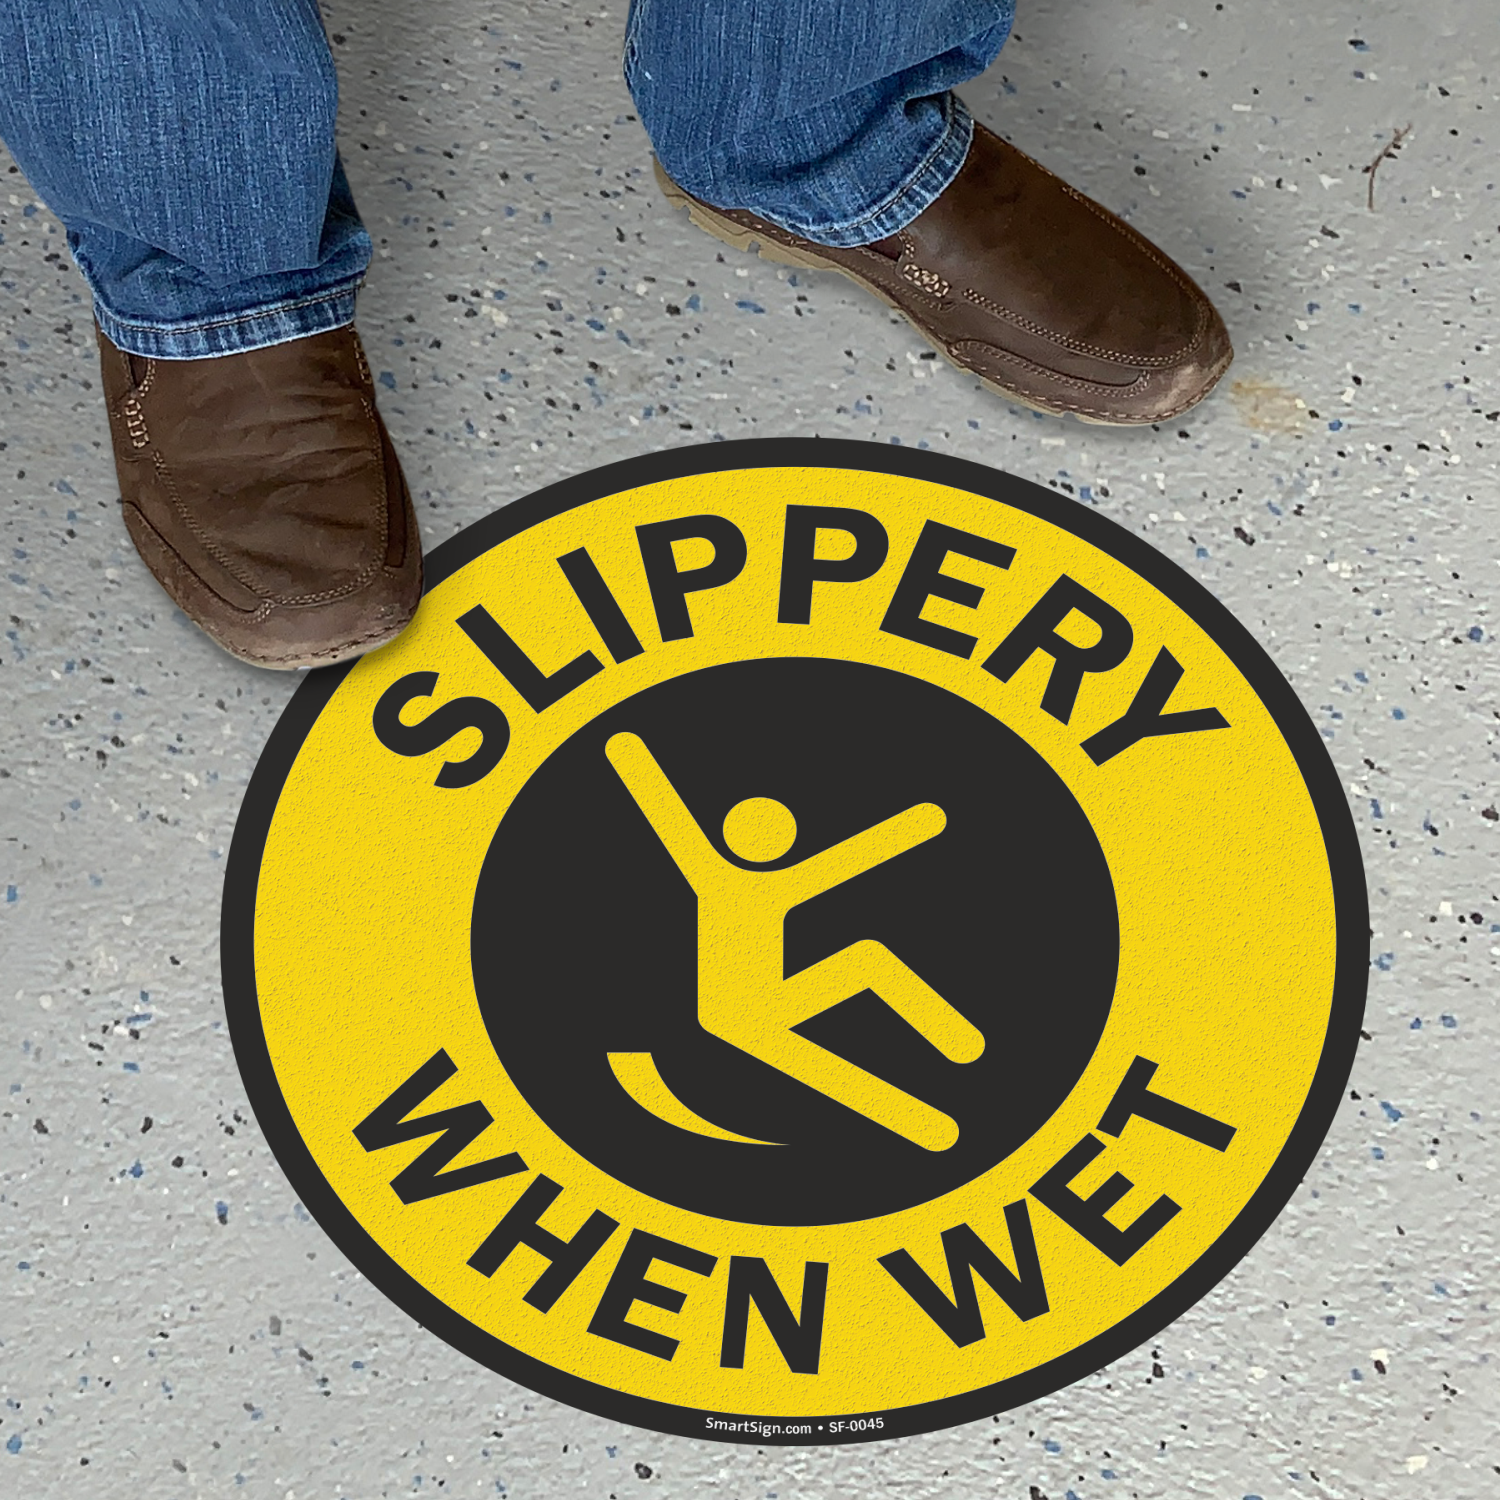 Slippery When Wet Sticker 150mm quality vinyl water & fade proof safety oh&s 